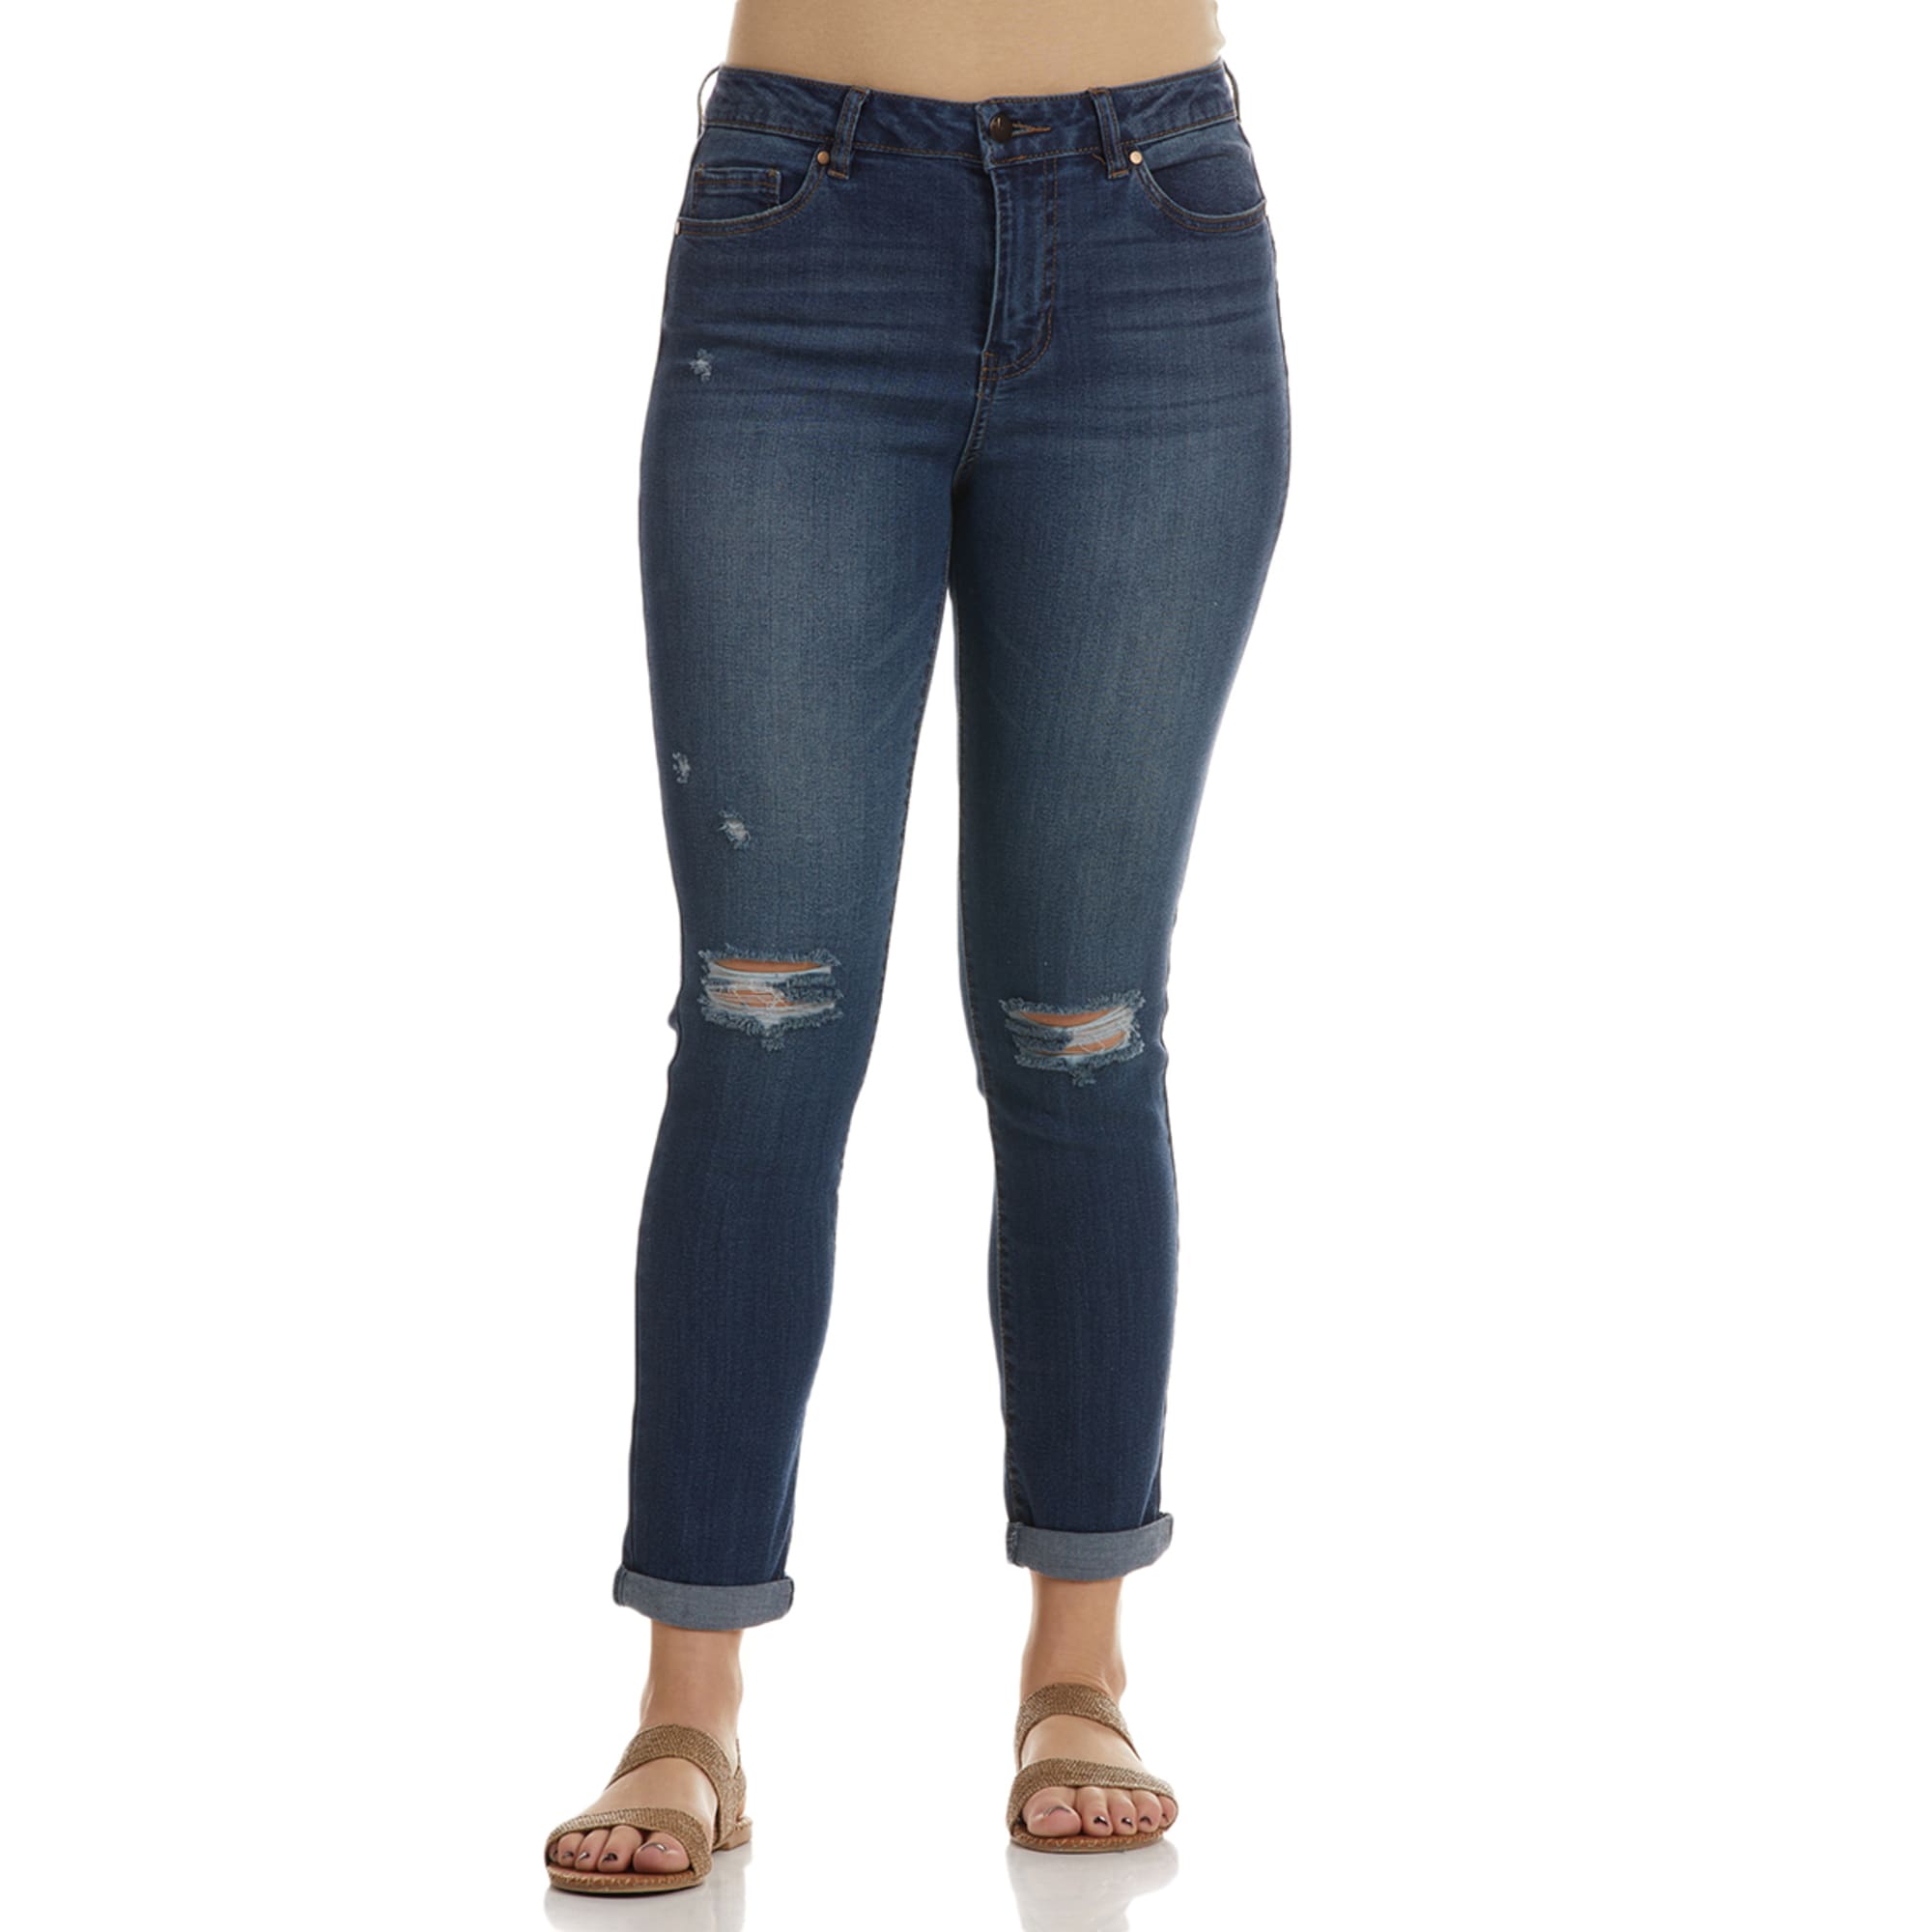 D JEANS Women's Recycled Denim High-Waisted Girlfriend Jeans